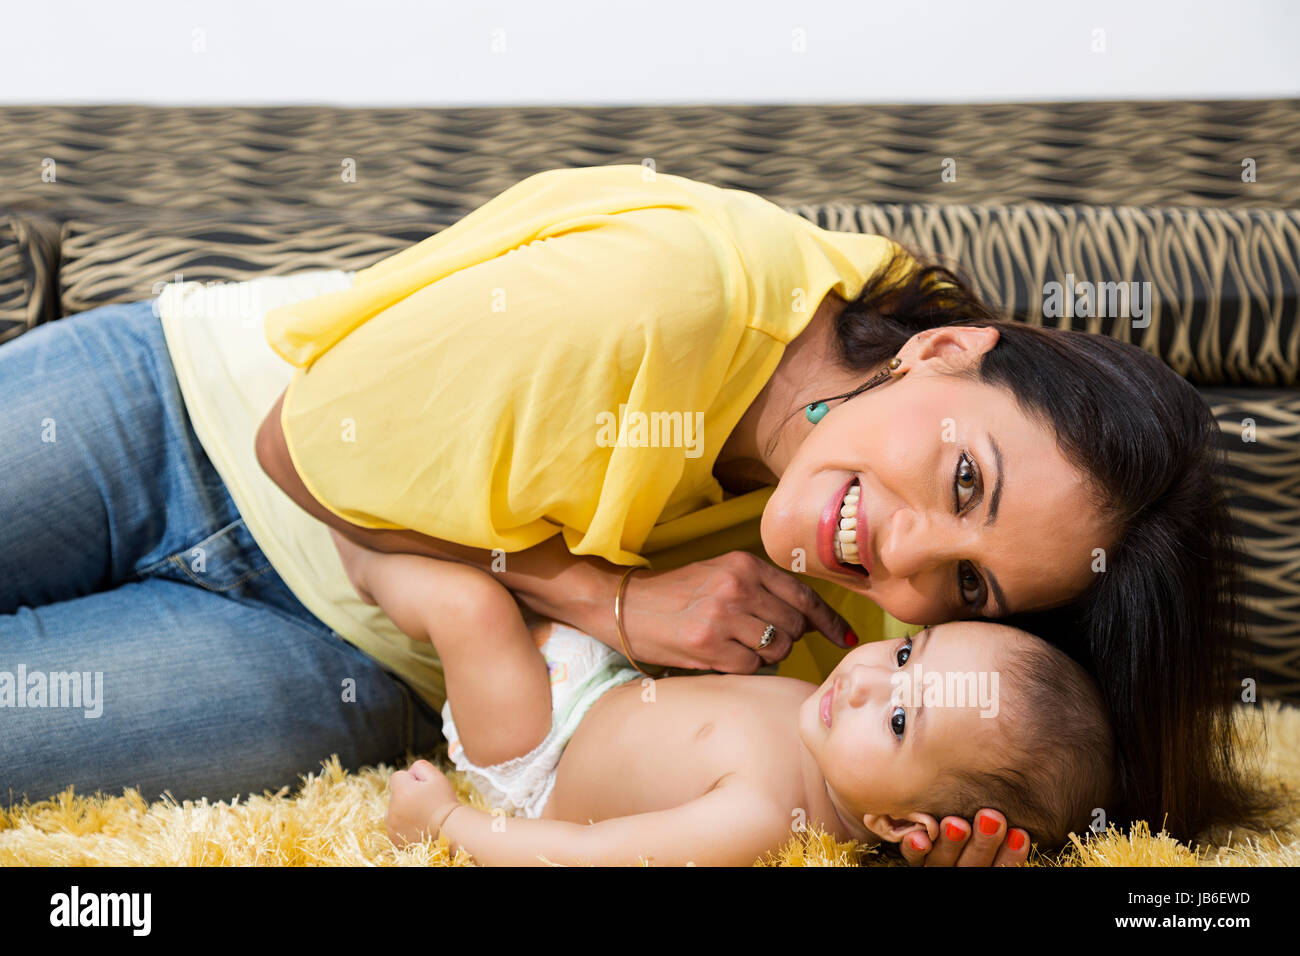 2 People Adult Woman At Home Baby Boy Mother Playful Rug Son Togetherness Stock Photo